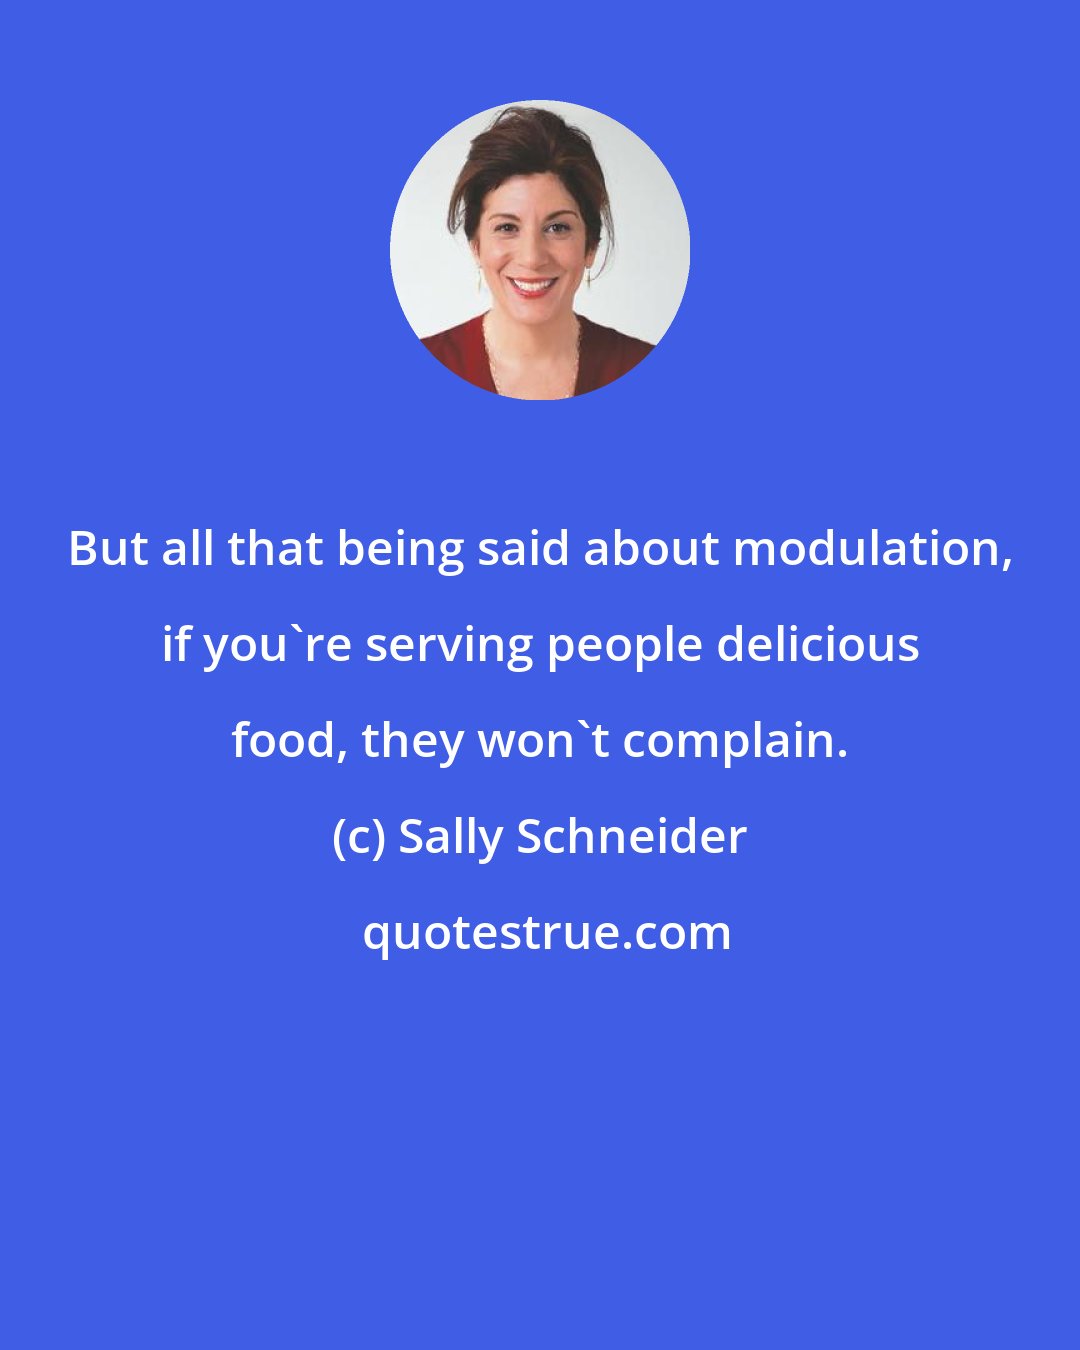 Sally Schneider: But all that being said about modulation, if you're serving people delicious food, they won't complain.